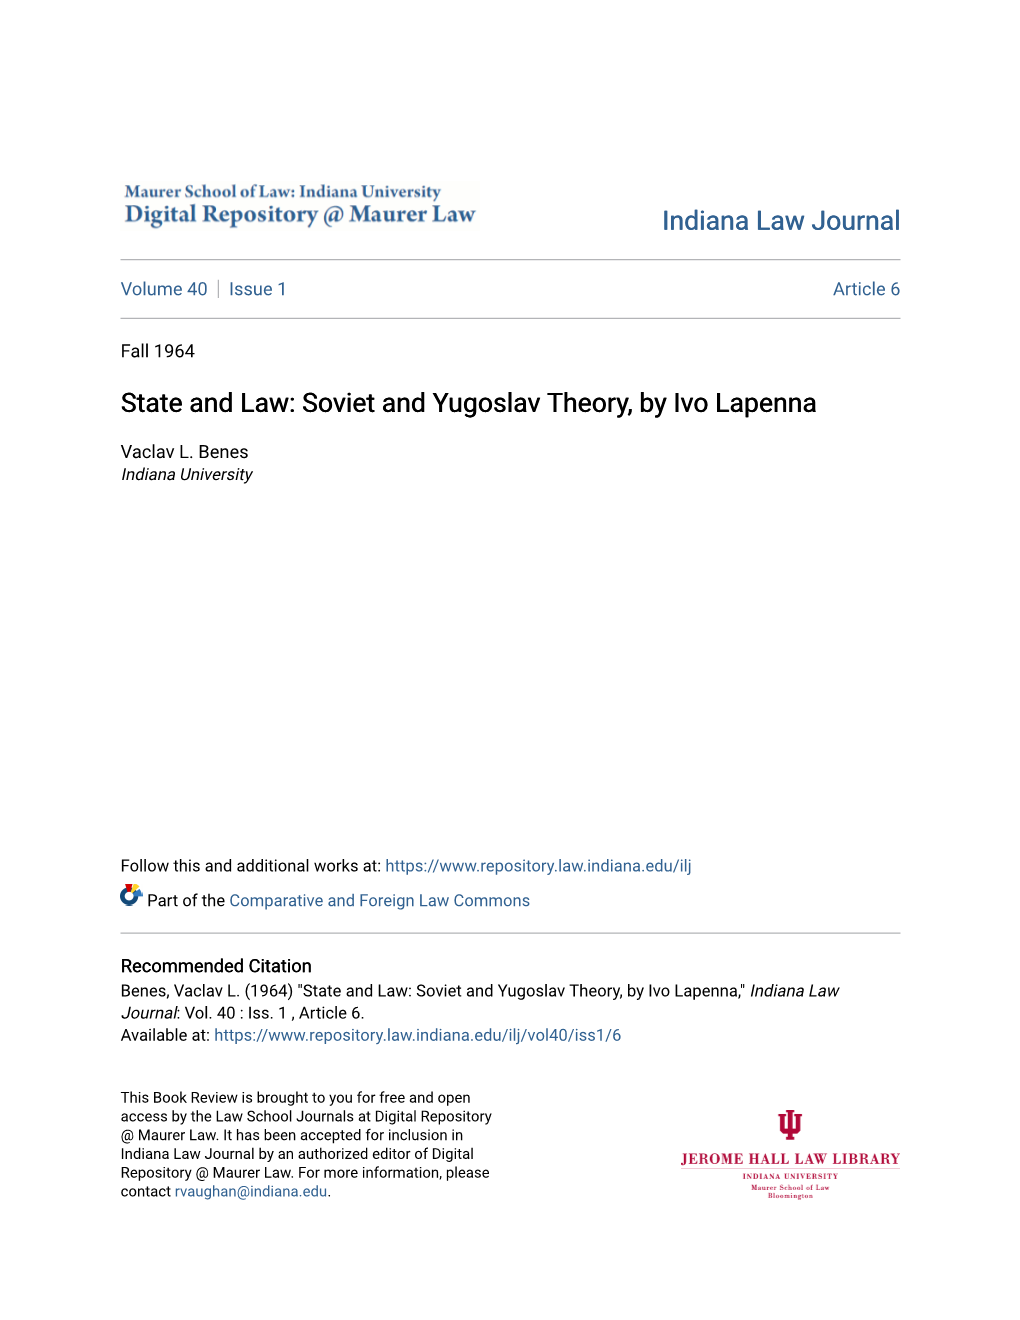 State and Law: Soviet and Yugoslav Theory, by Ivo Lapenna